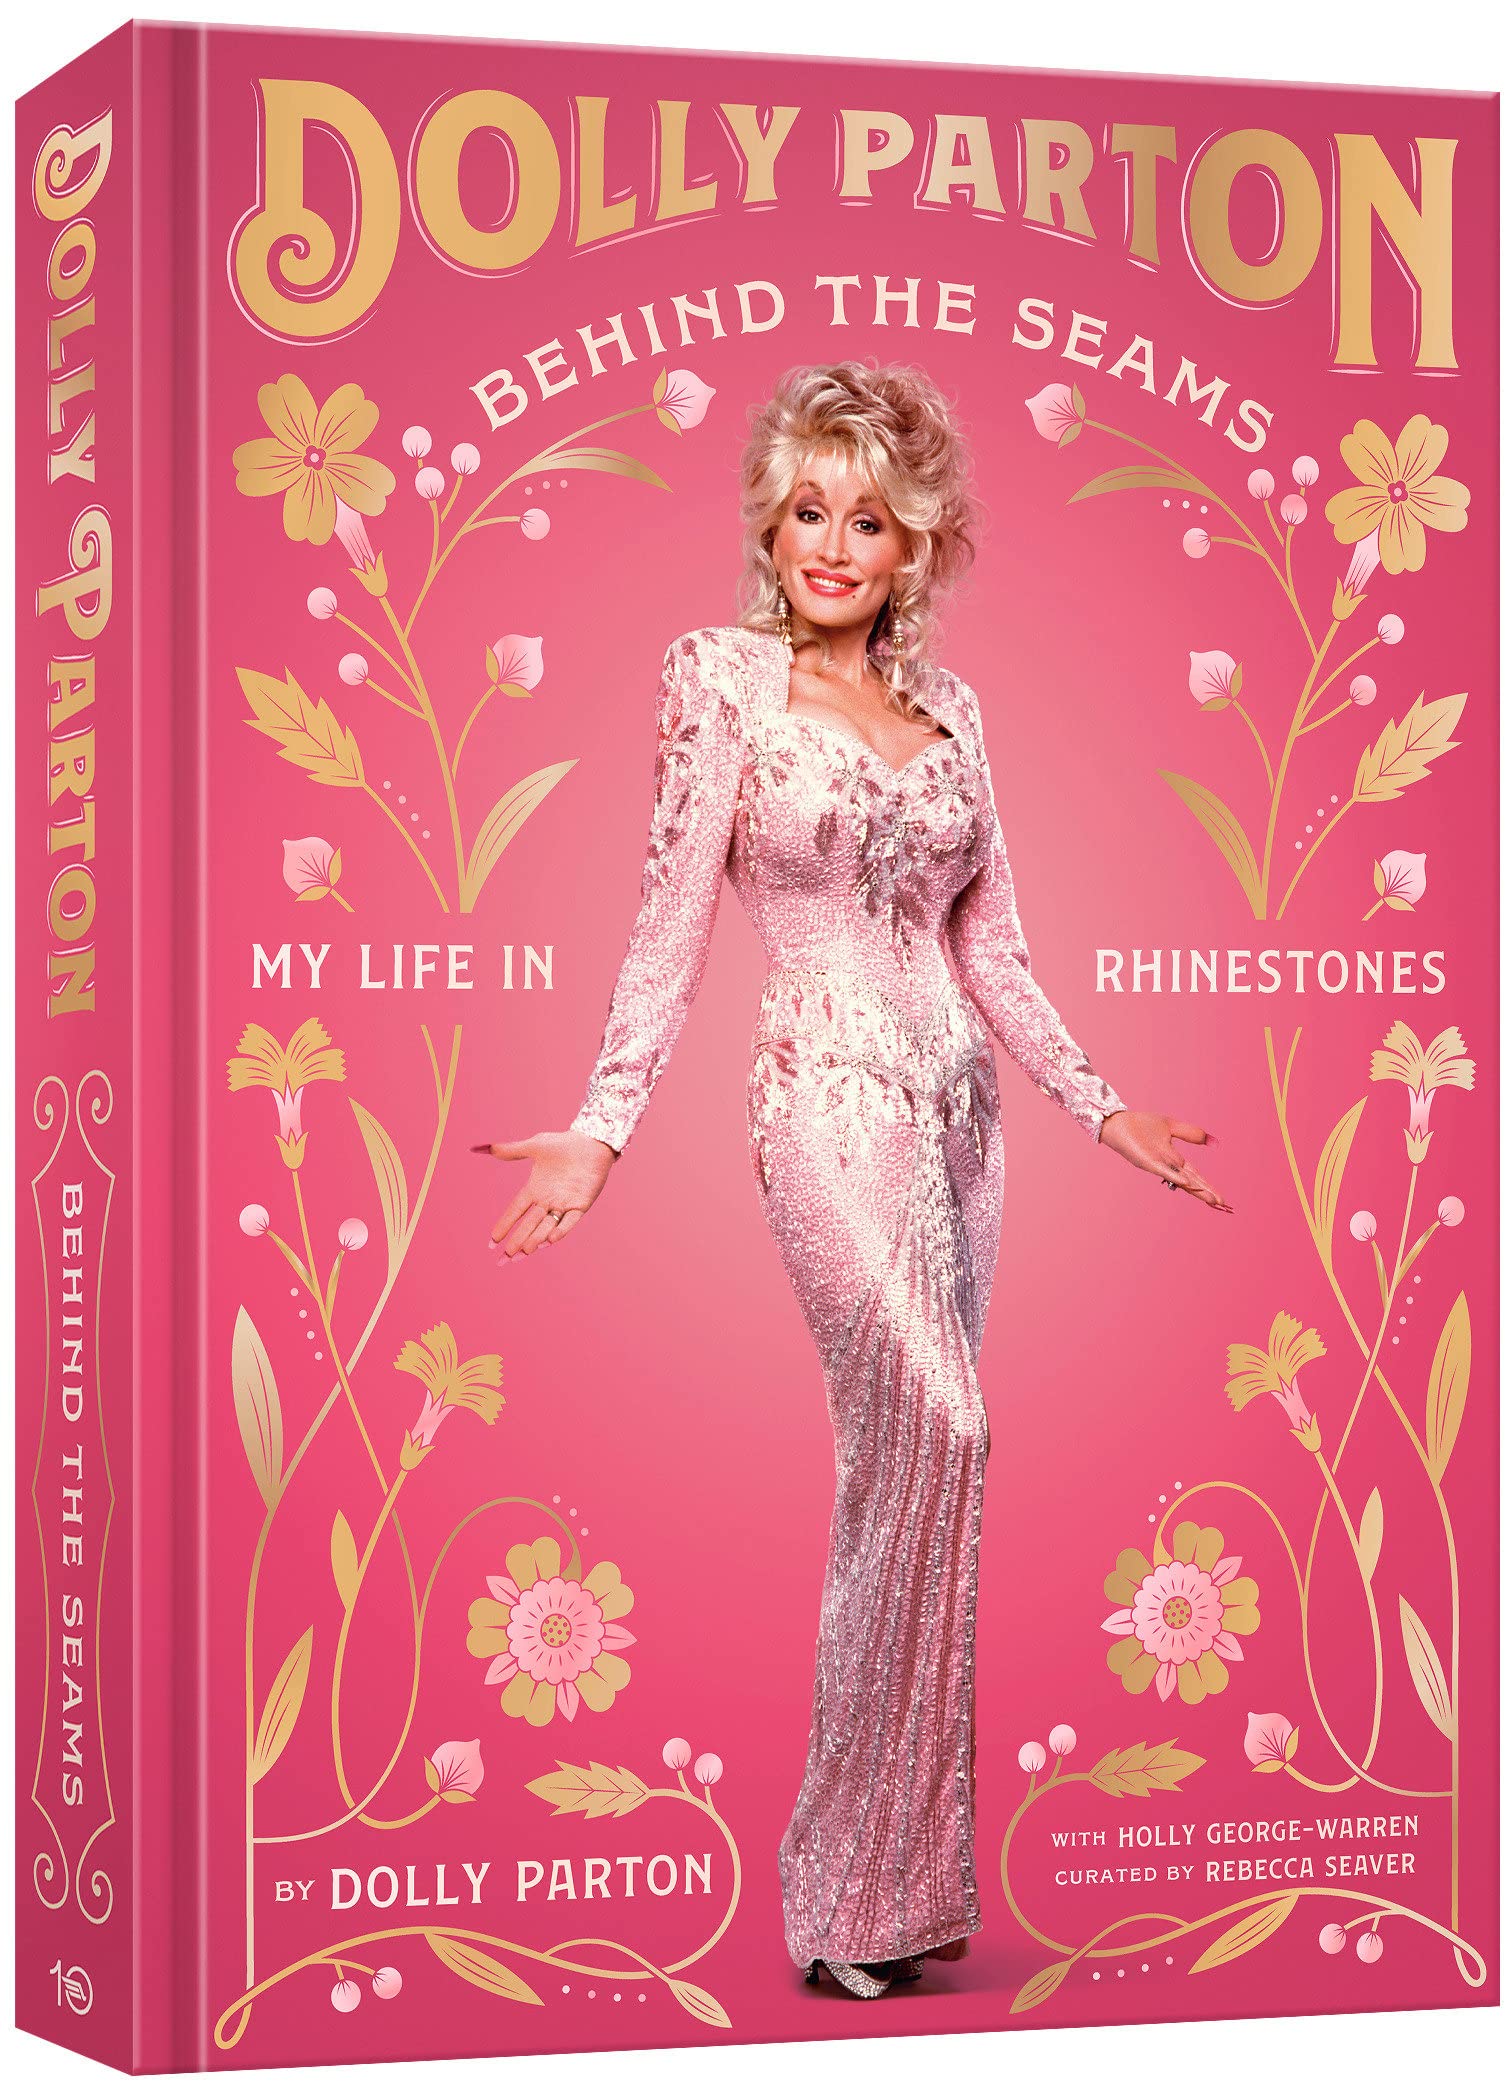 Cover of Dolly Parton's 'Behind the Seams' book